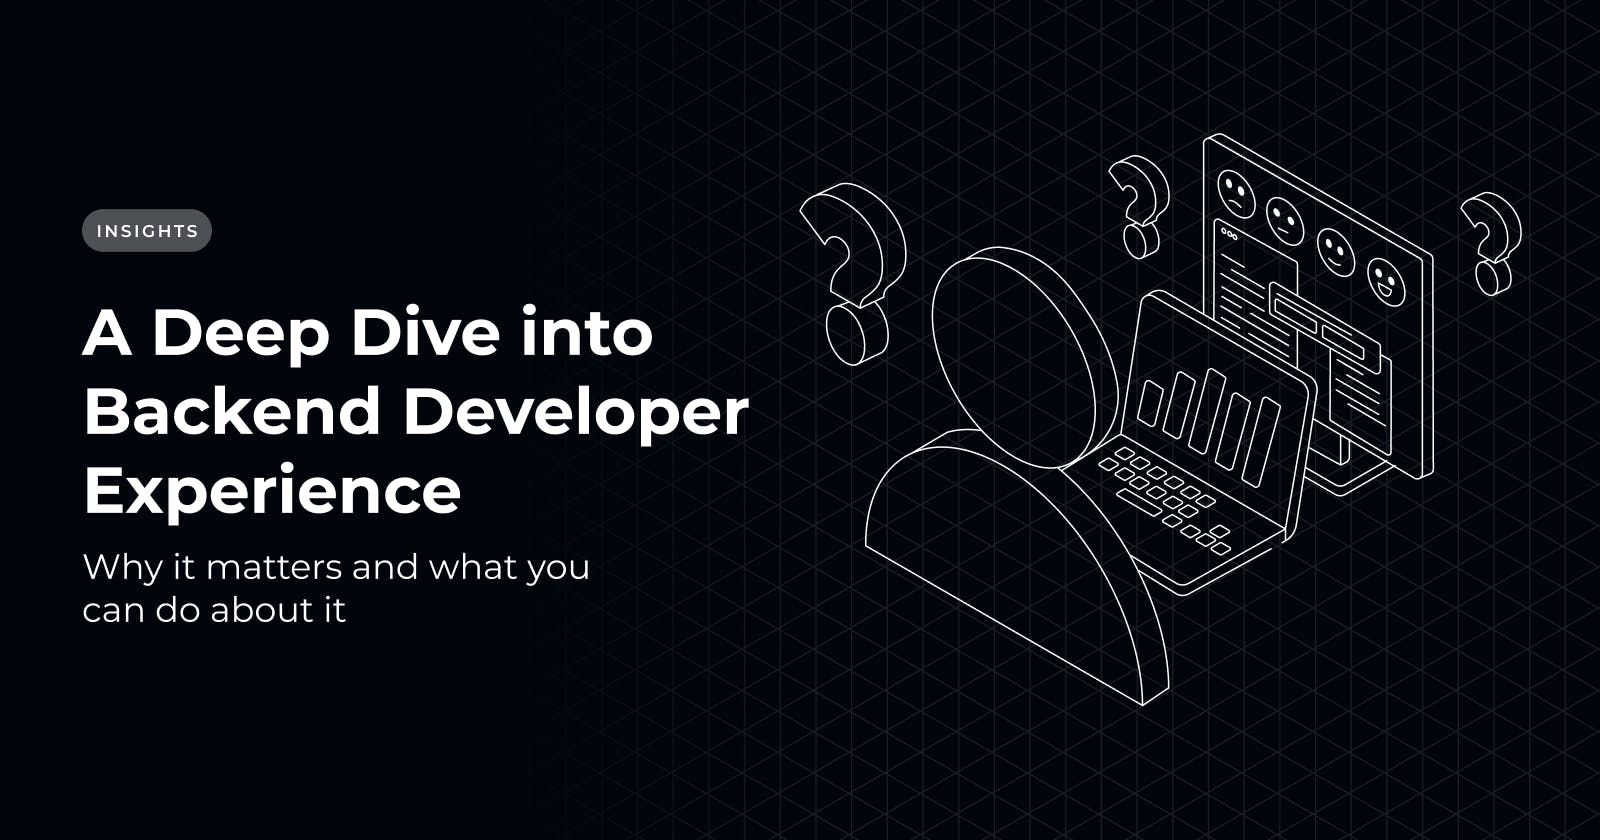 A Deep Dive into Backend Developer Experience, Why It Matters and What You Can Do About It